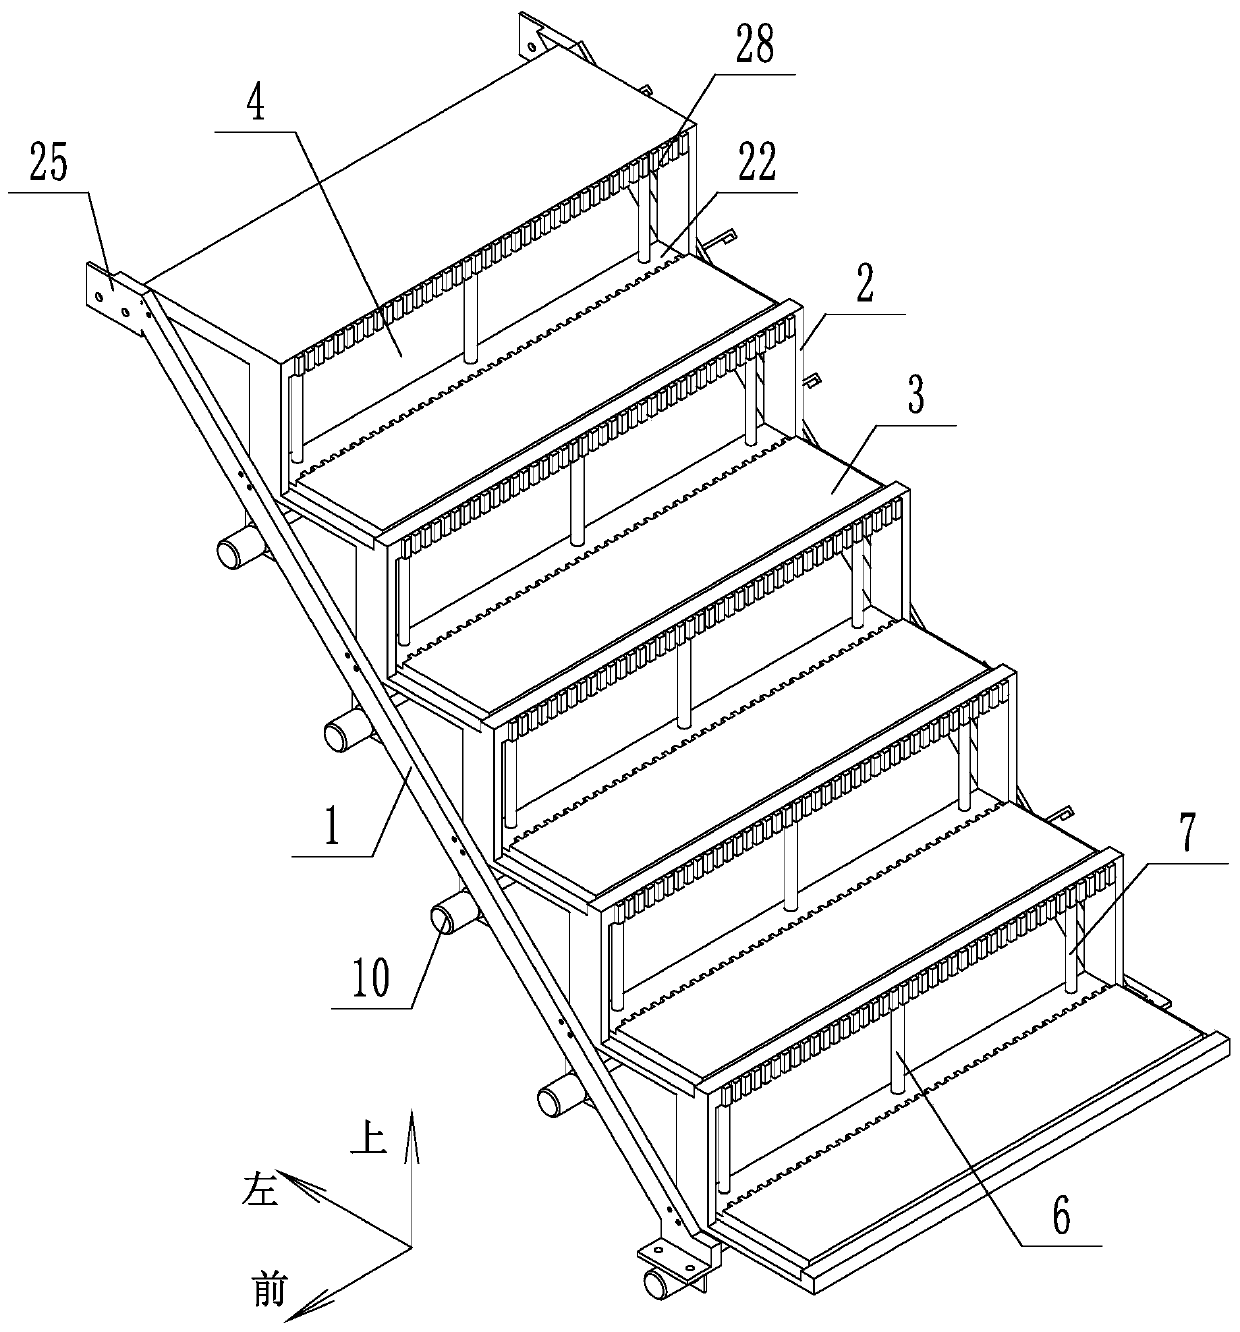 Stair with automatic lifting steps